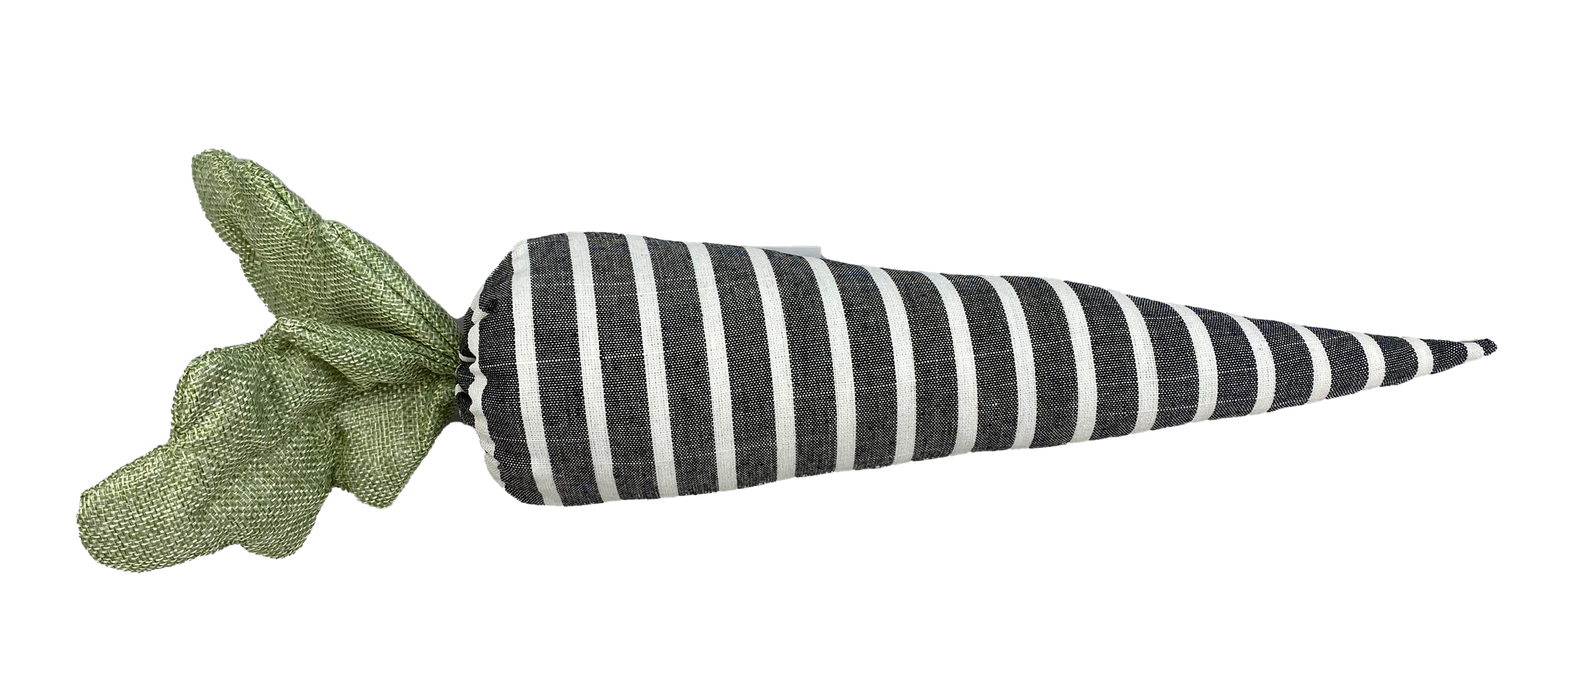 17" by 3.5" Black and White Plush Striped Carrot 63261BKWT